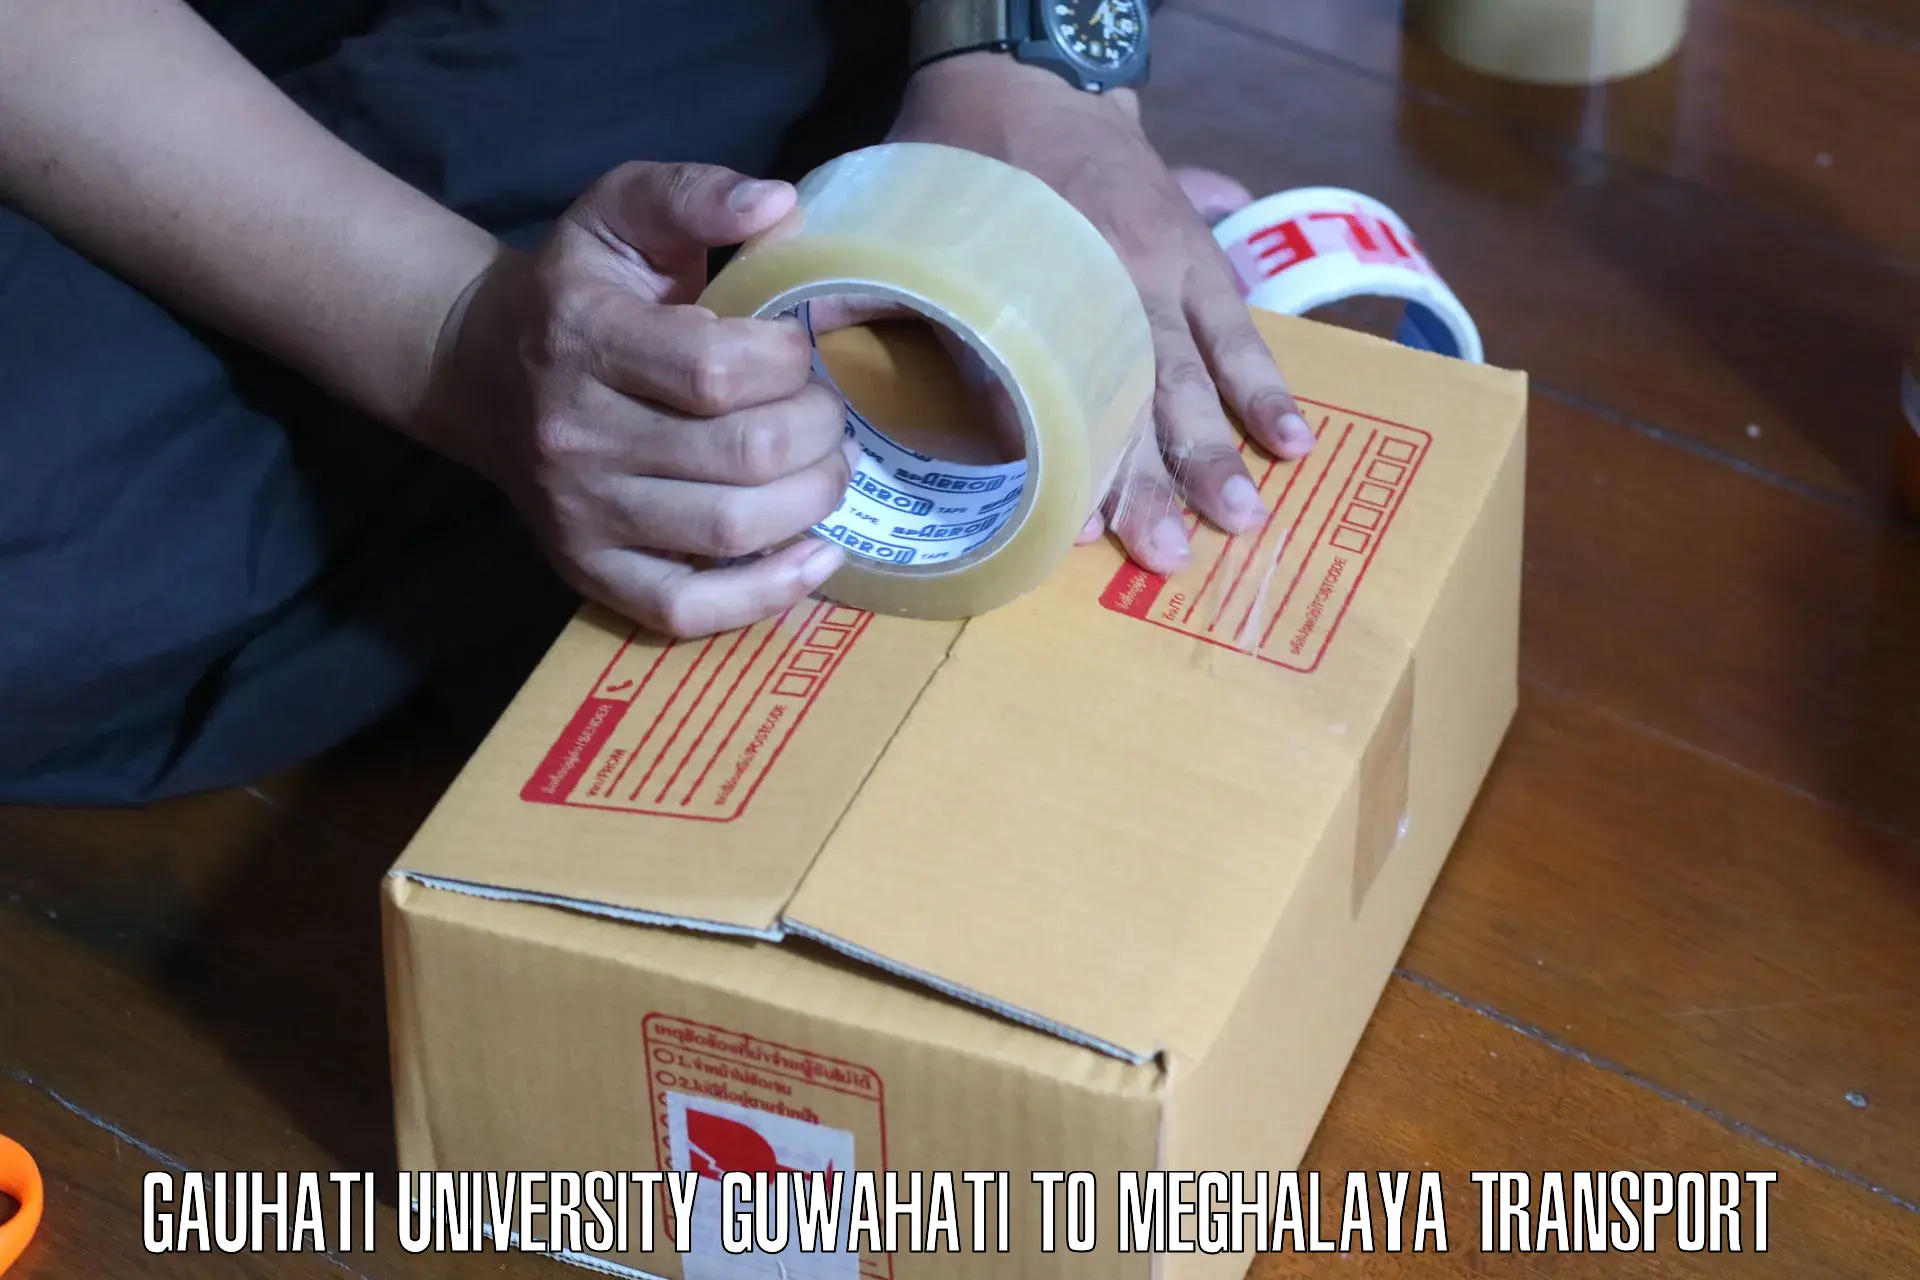 Package delivery services Gauhati University Guwahati to Ri Bhoi